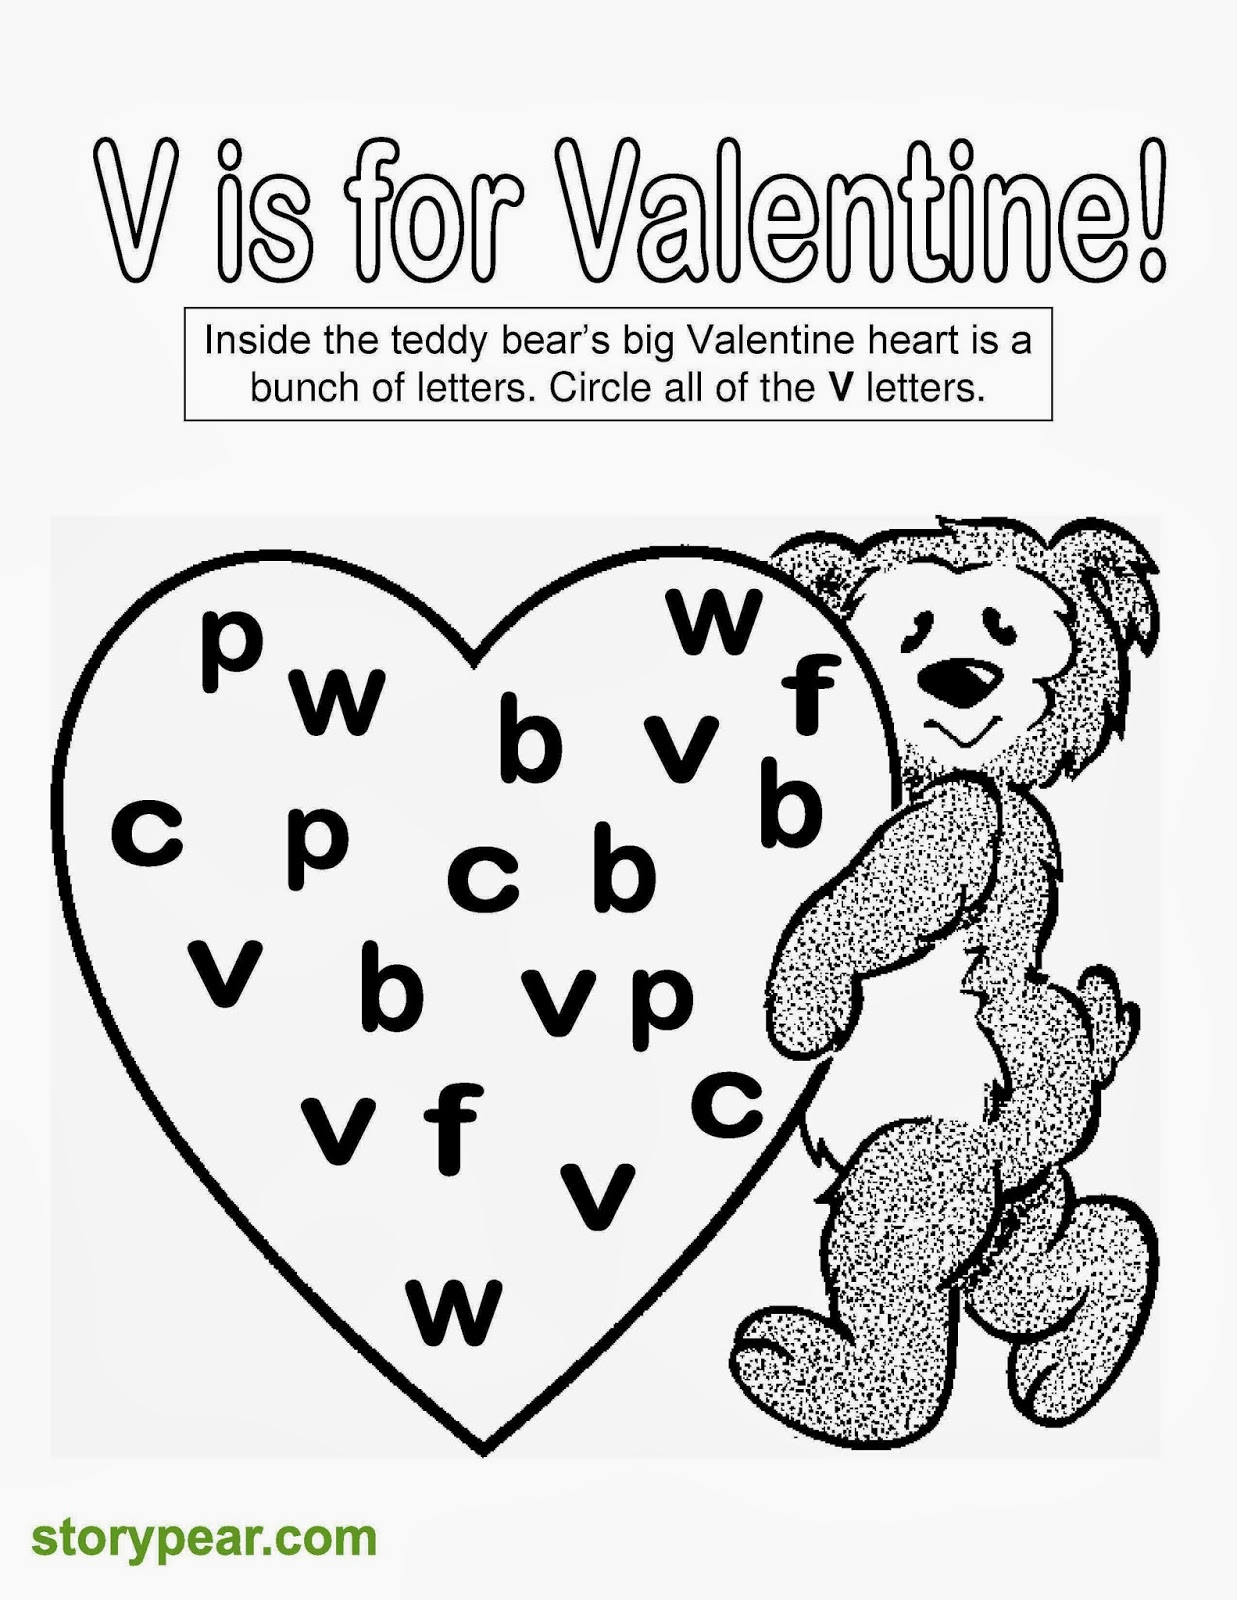 Story Pear Free Valentine Day 39 s Printable Sheets For Preschoolers 